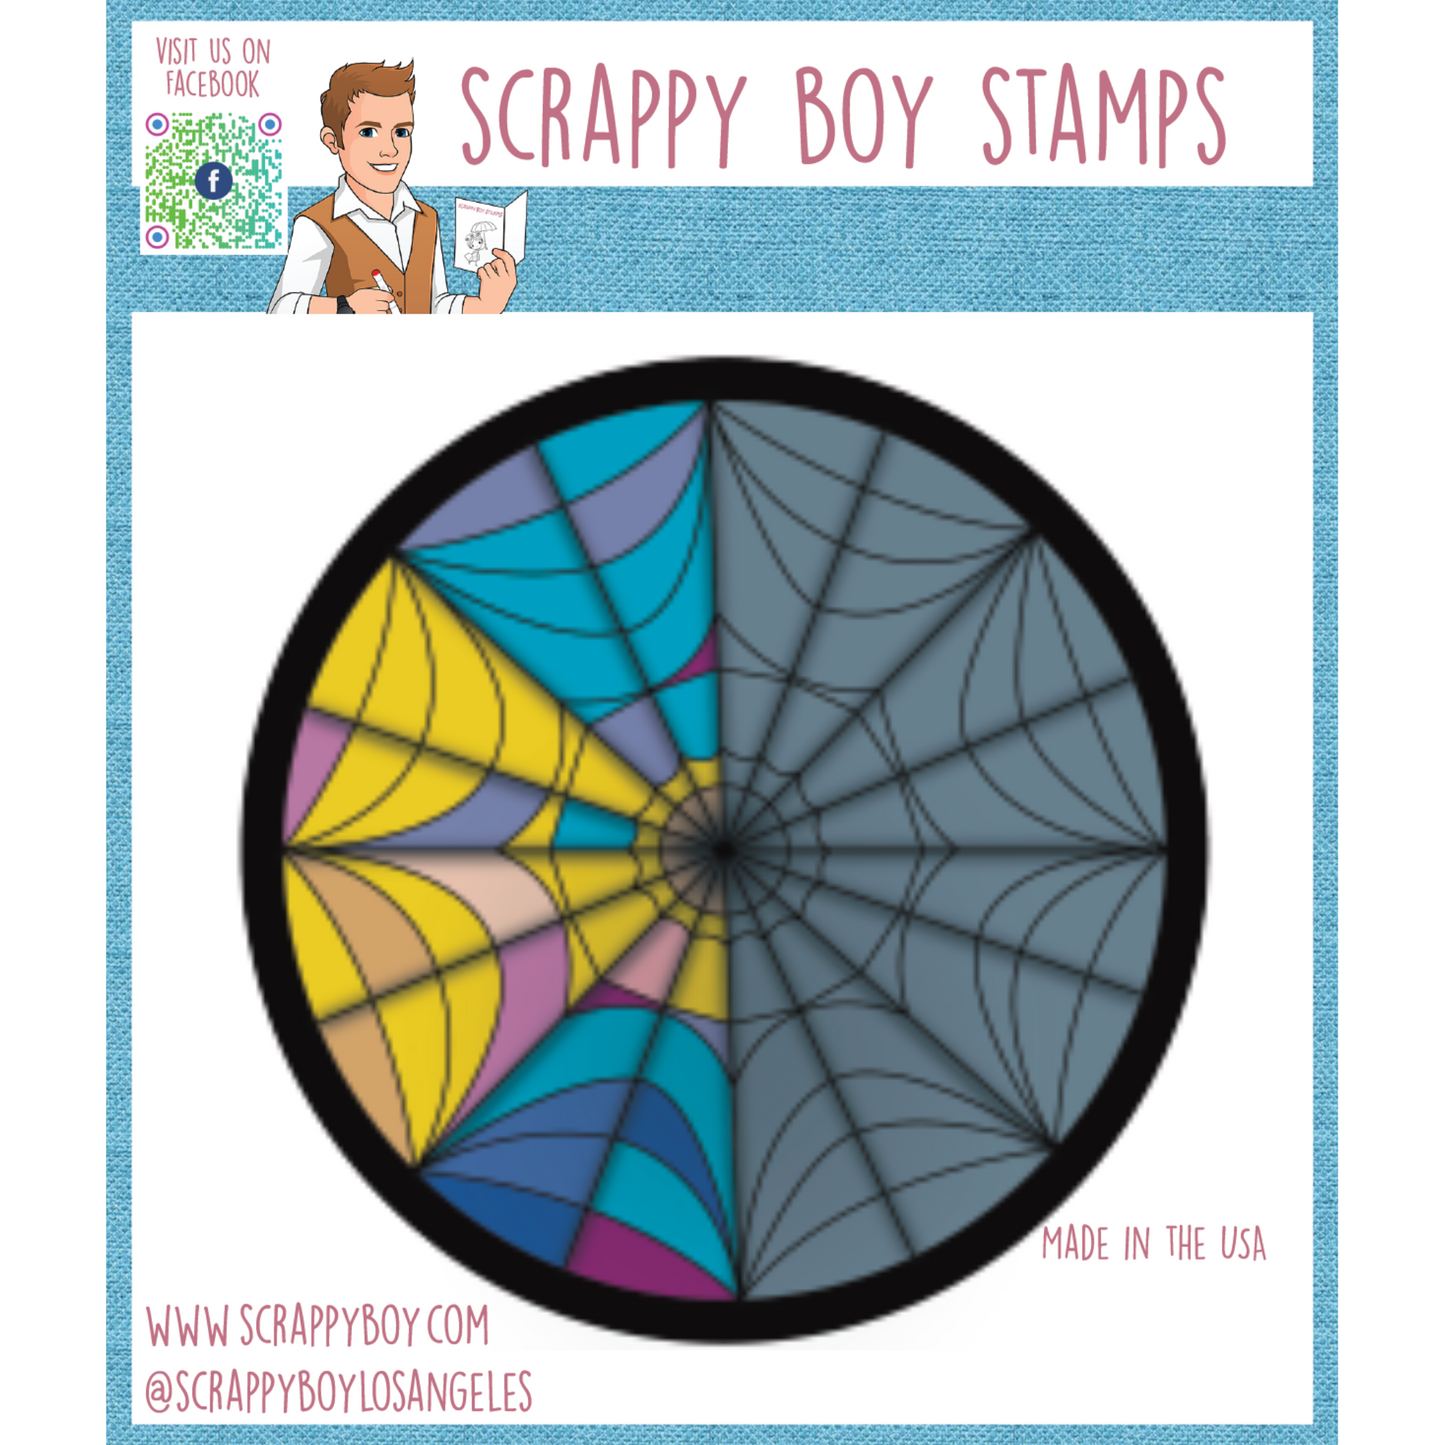 
                  
                    I Want It All Bundle - Goth Girl Release Scrappy Boy Stamps
                  
                